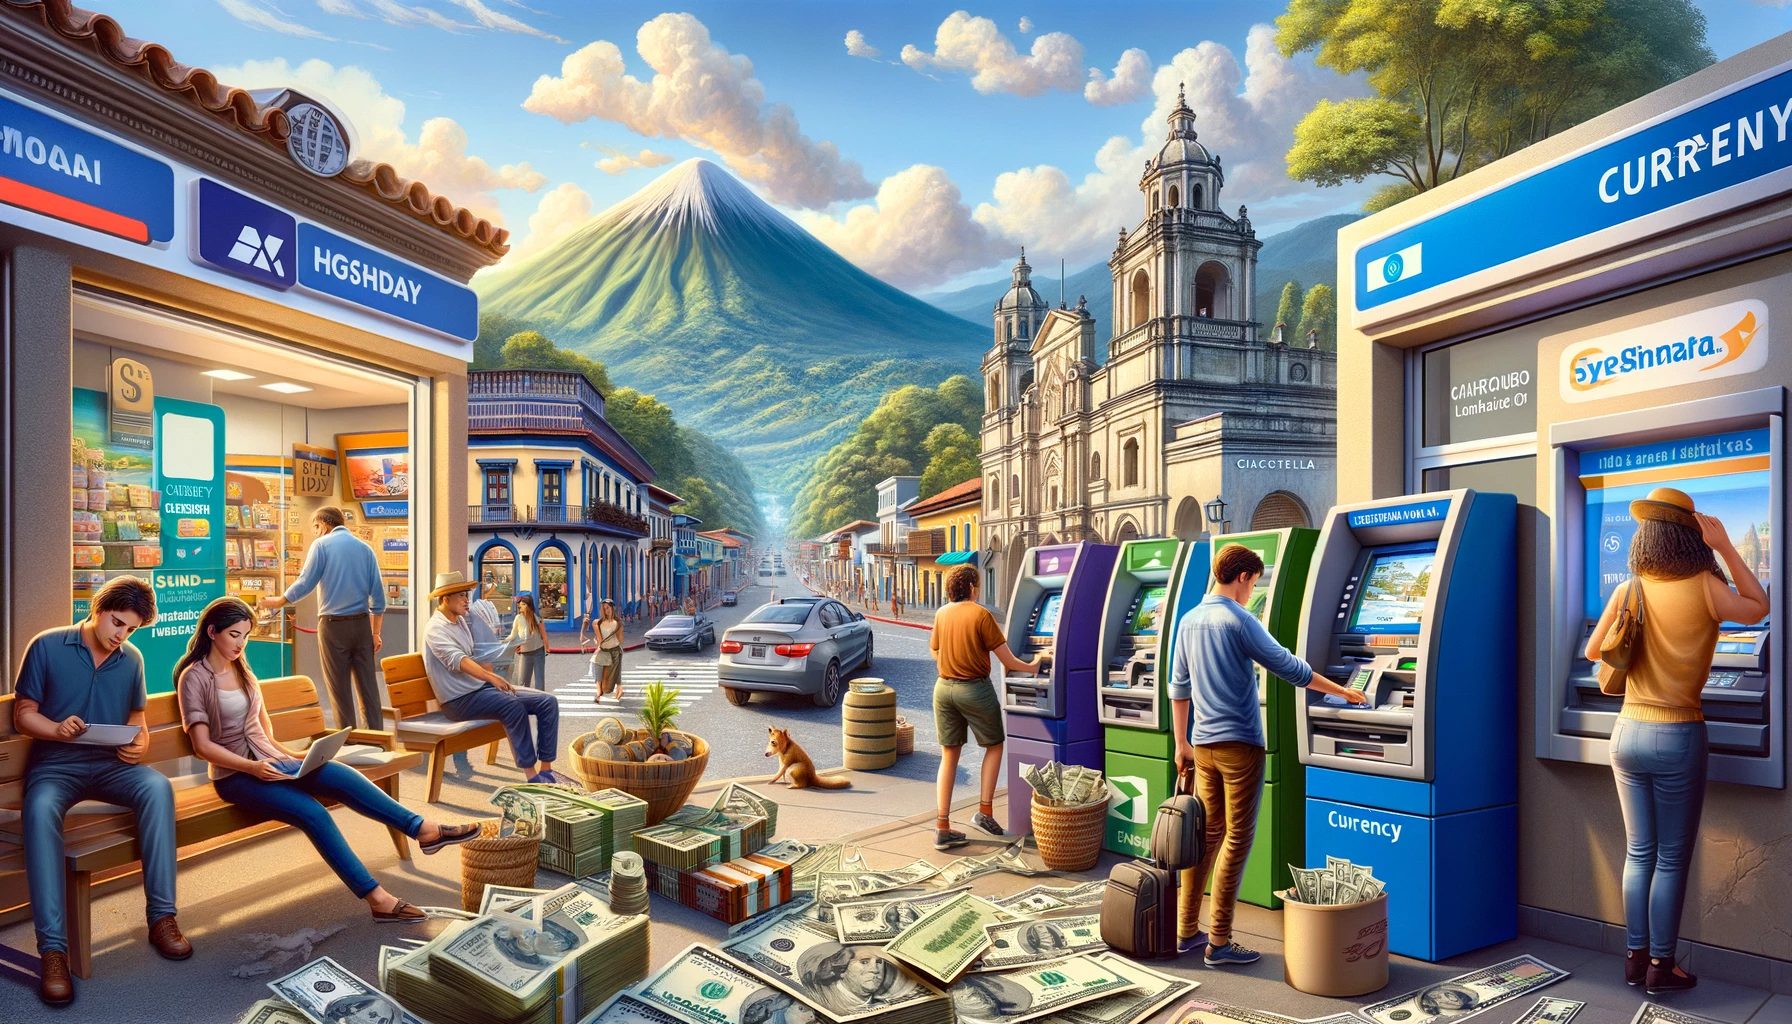 Busy street with people using ATMs and volcano backdrop.